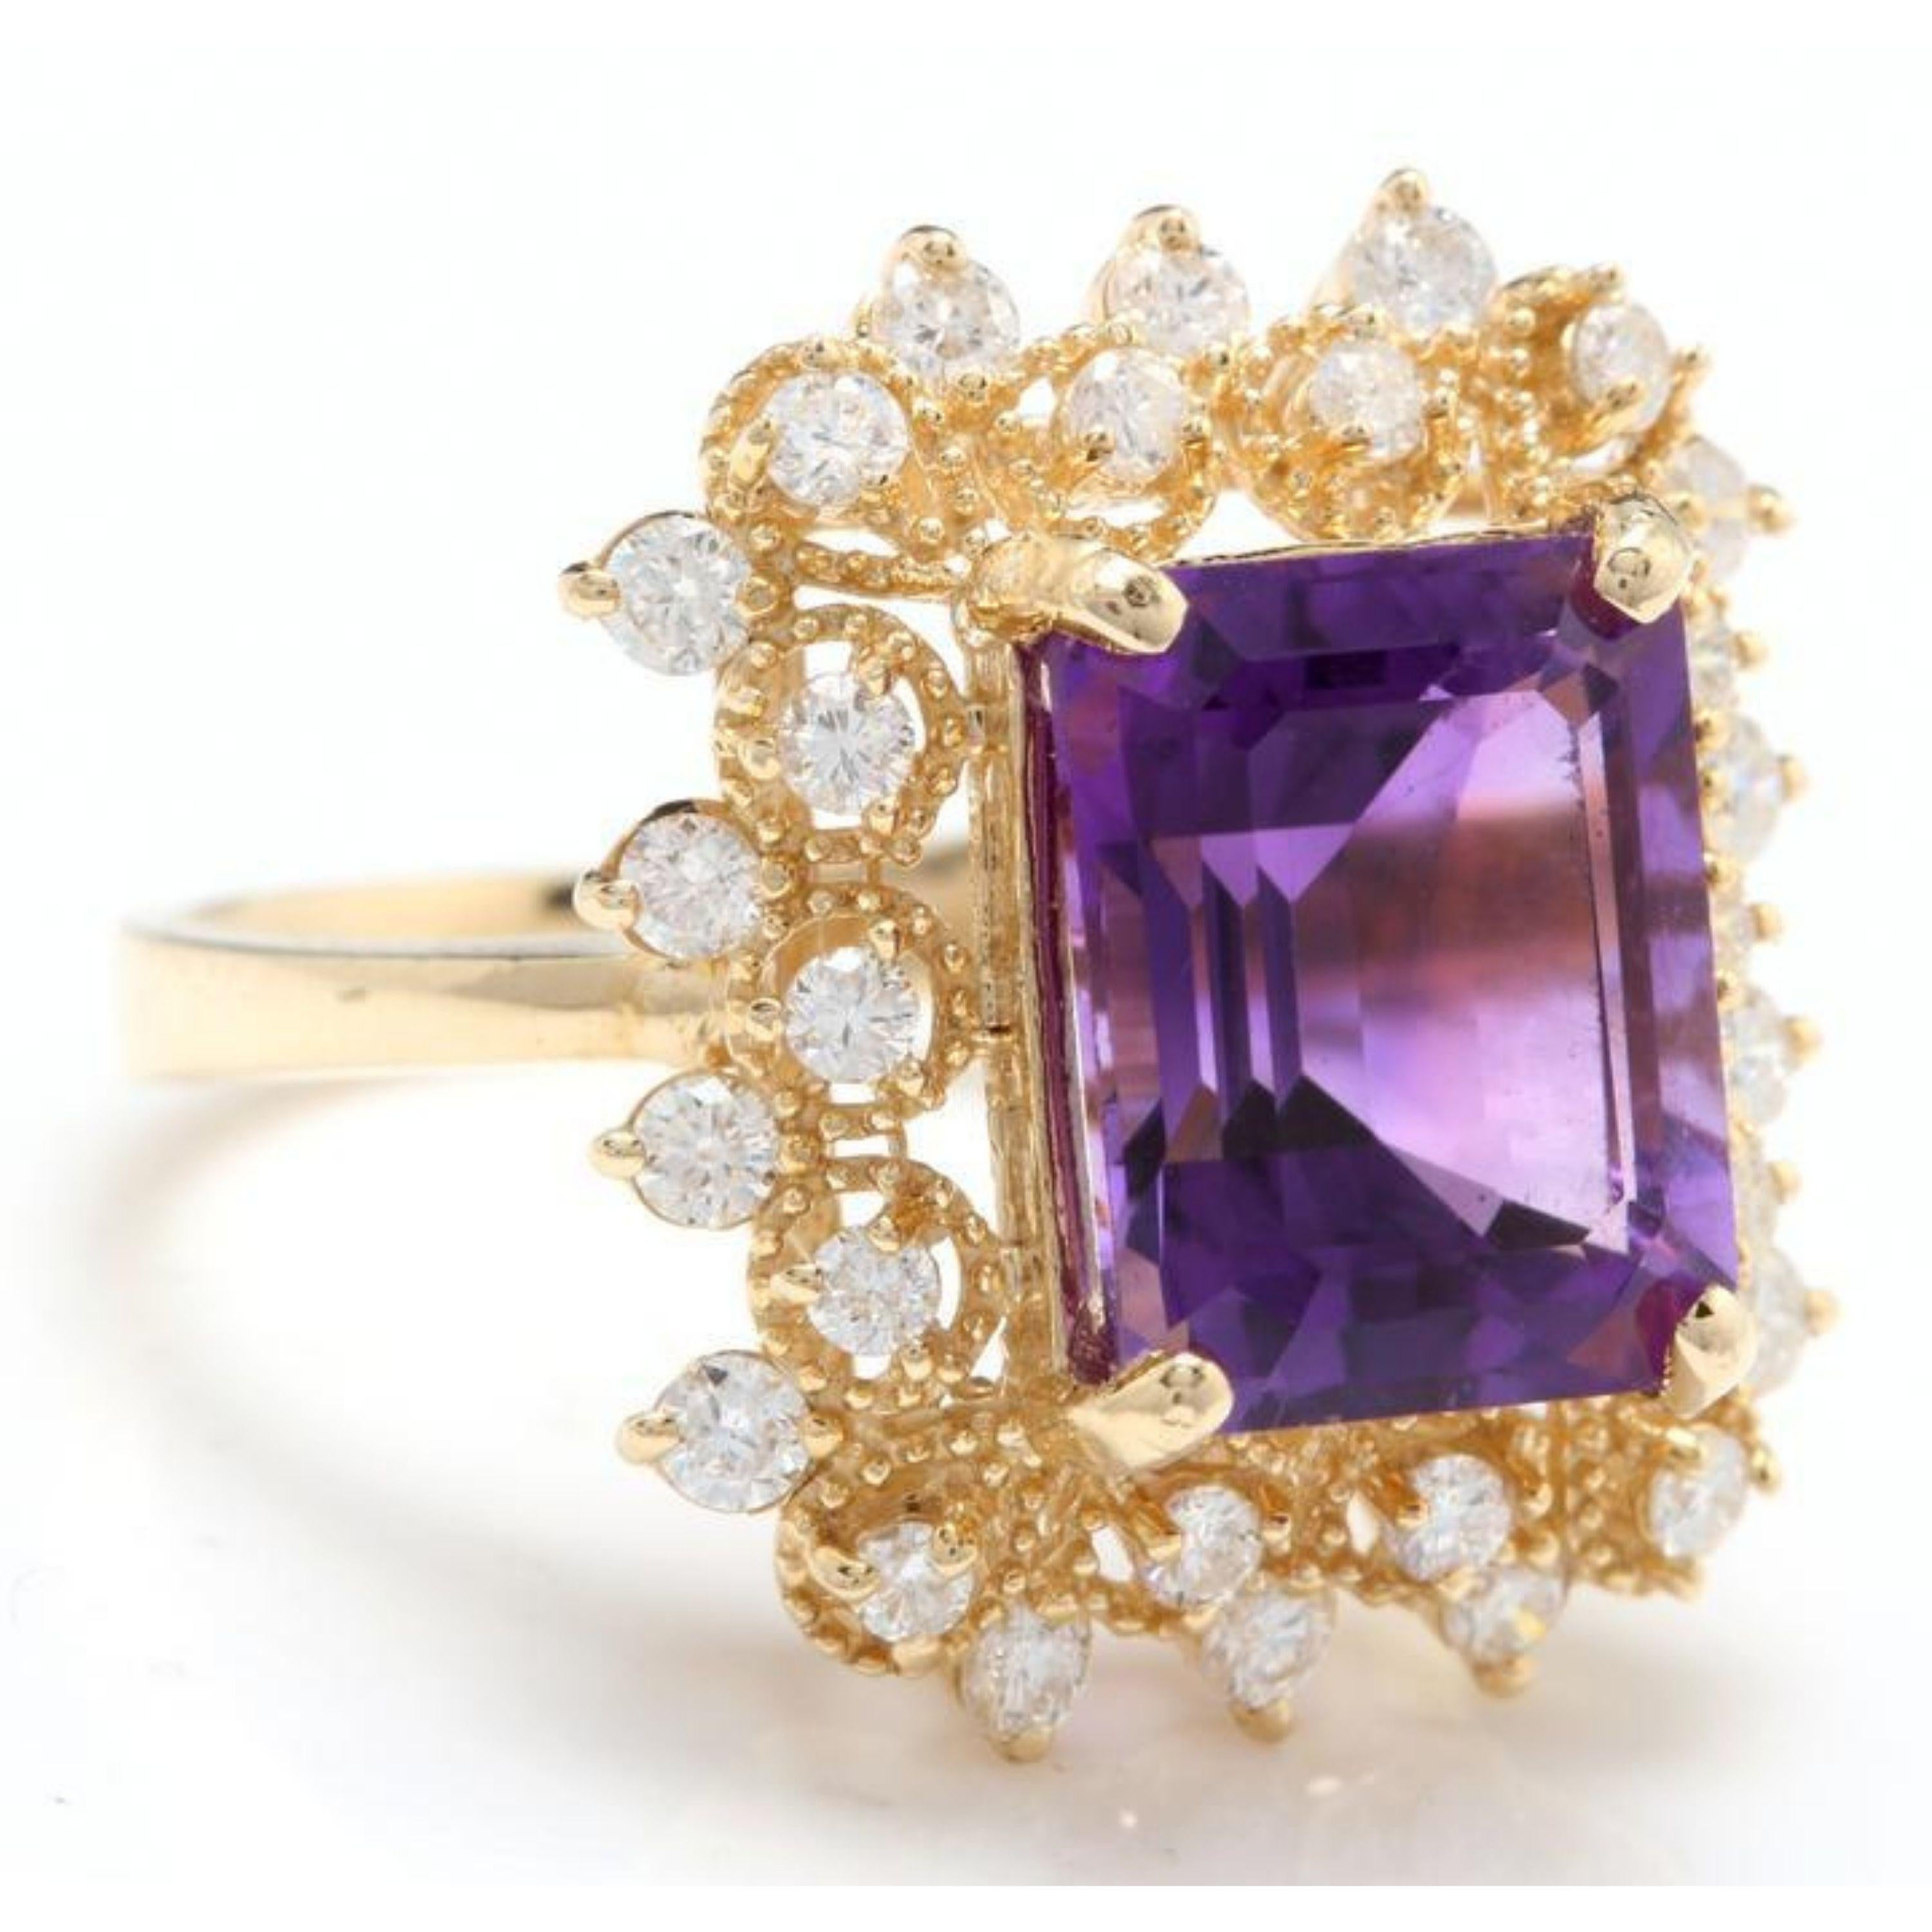 5.80 Carats Impressive Natural Amethyst and Diamond 14K Solid Yellow Gold Ring

Total Amethyst Weight is: Approx. 5.00 Carats

Amethyst Measures: Approx. 11.00 x 9.00mm

Natural Round Diamonds Weight: Approx. 0.80 Carats (color G-H / Clarity